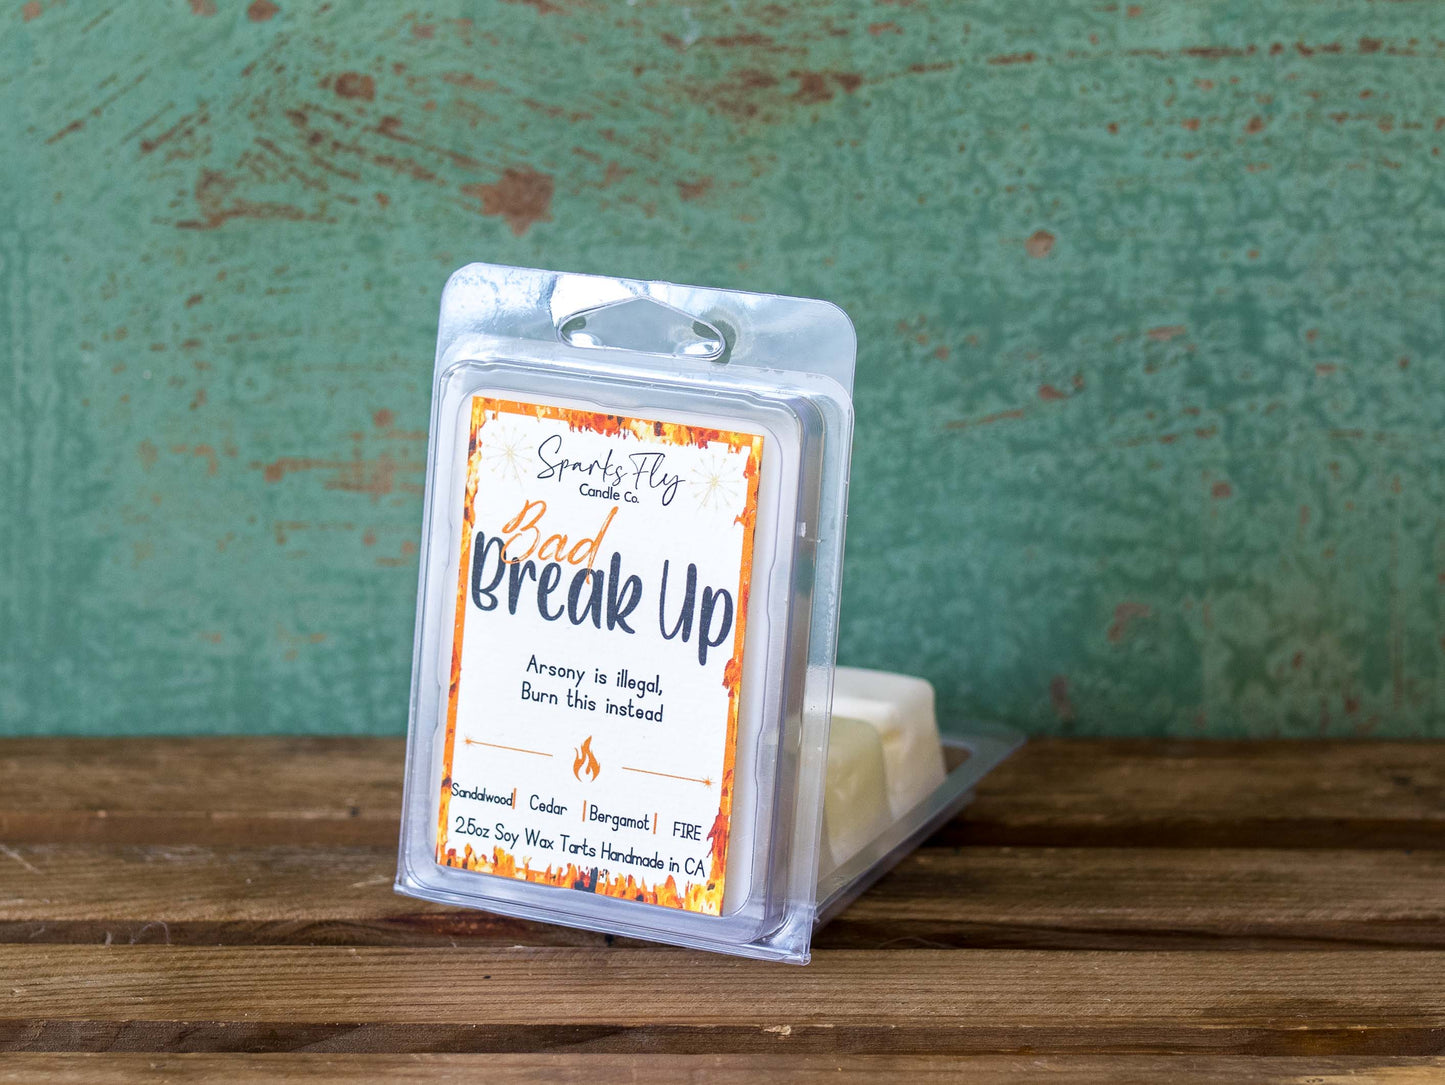 Bad Breakup sassy candle; promoting legal relief from heartbreak with a fiery scent twist, satire